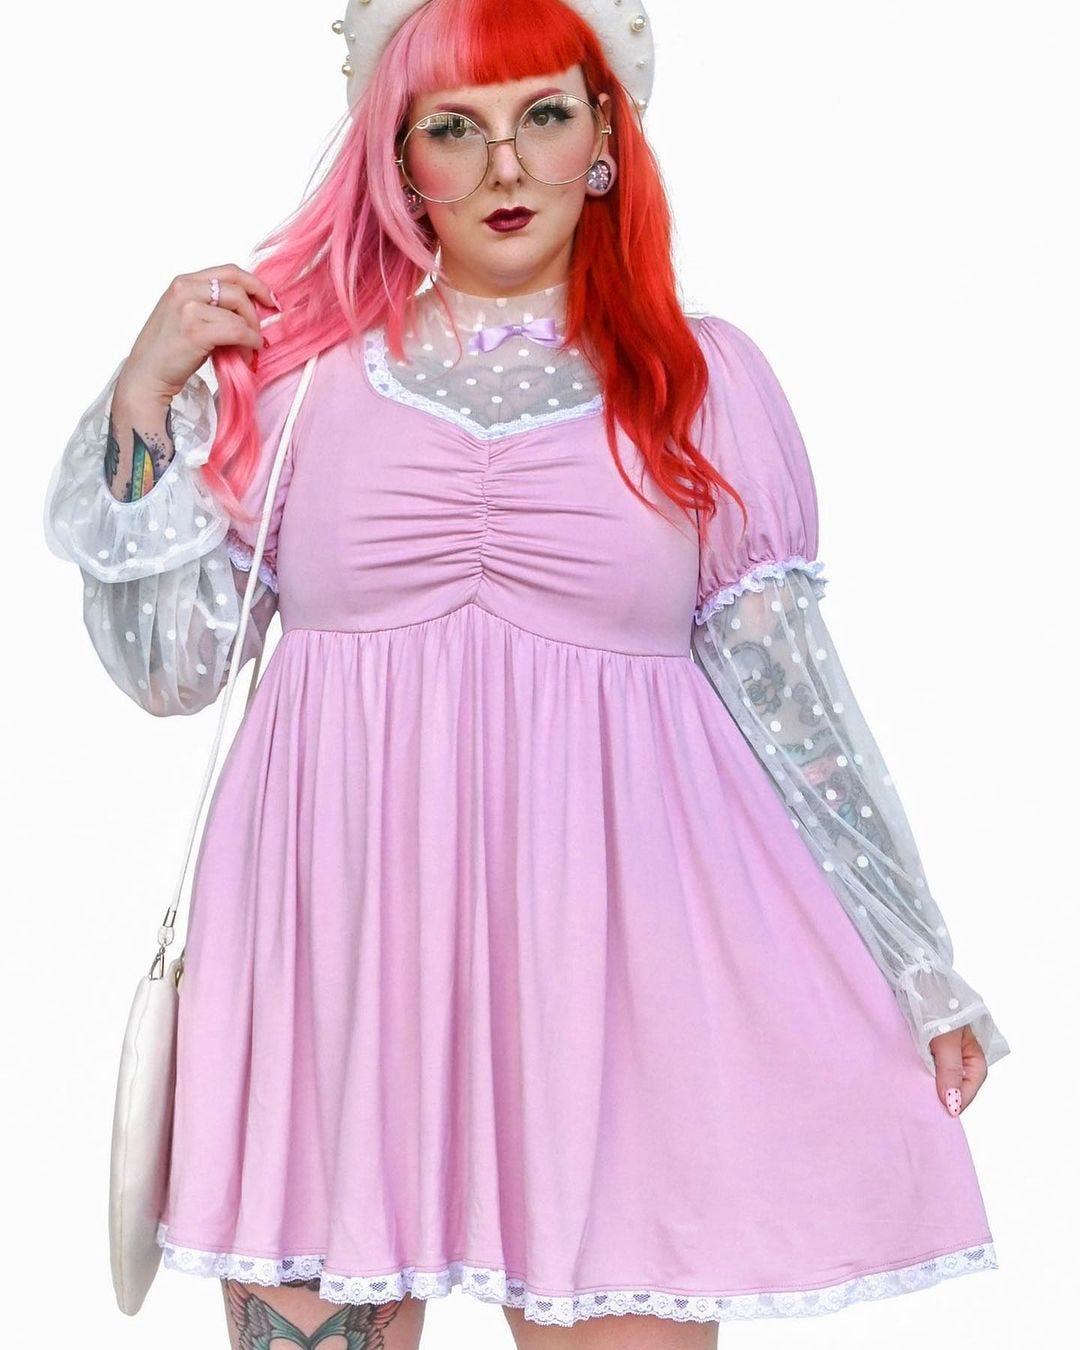 Alternative women's clothing wholesale including plus size apparel and  dresses.